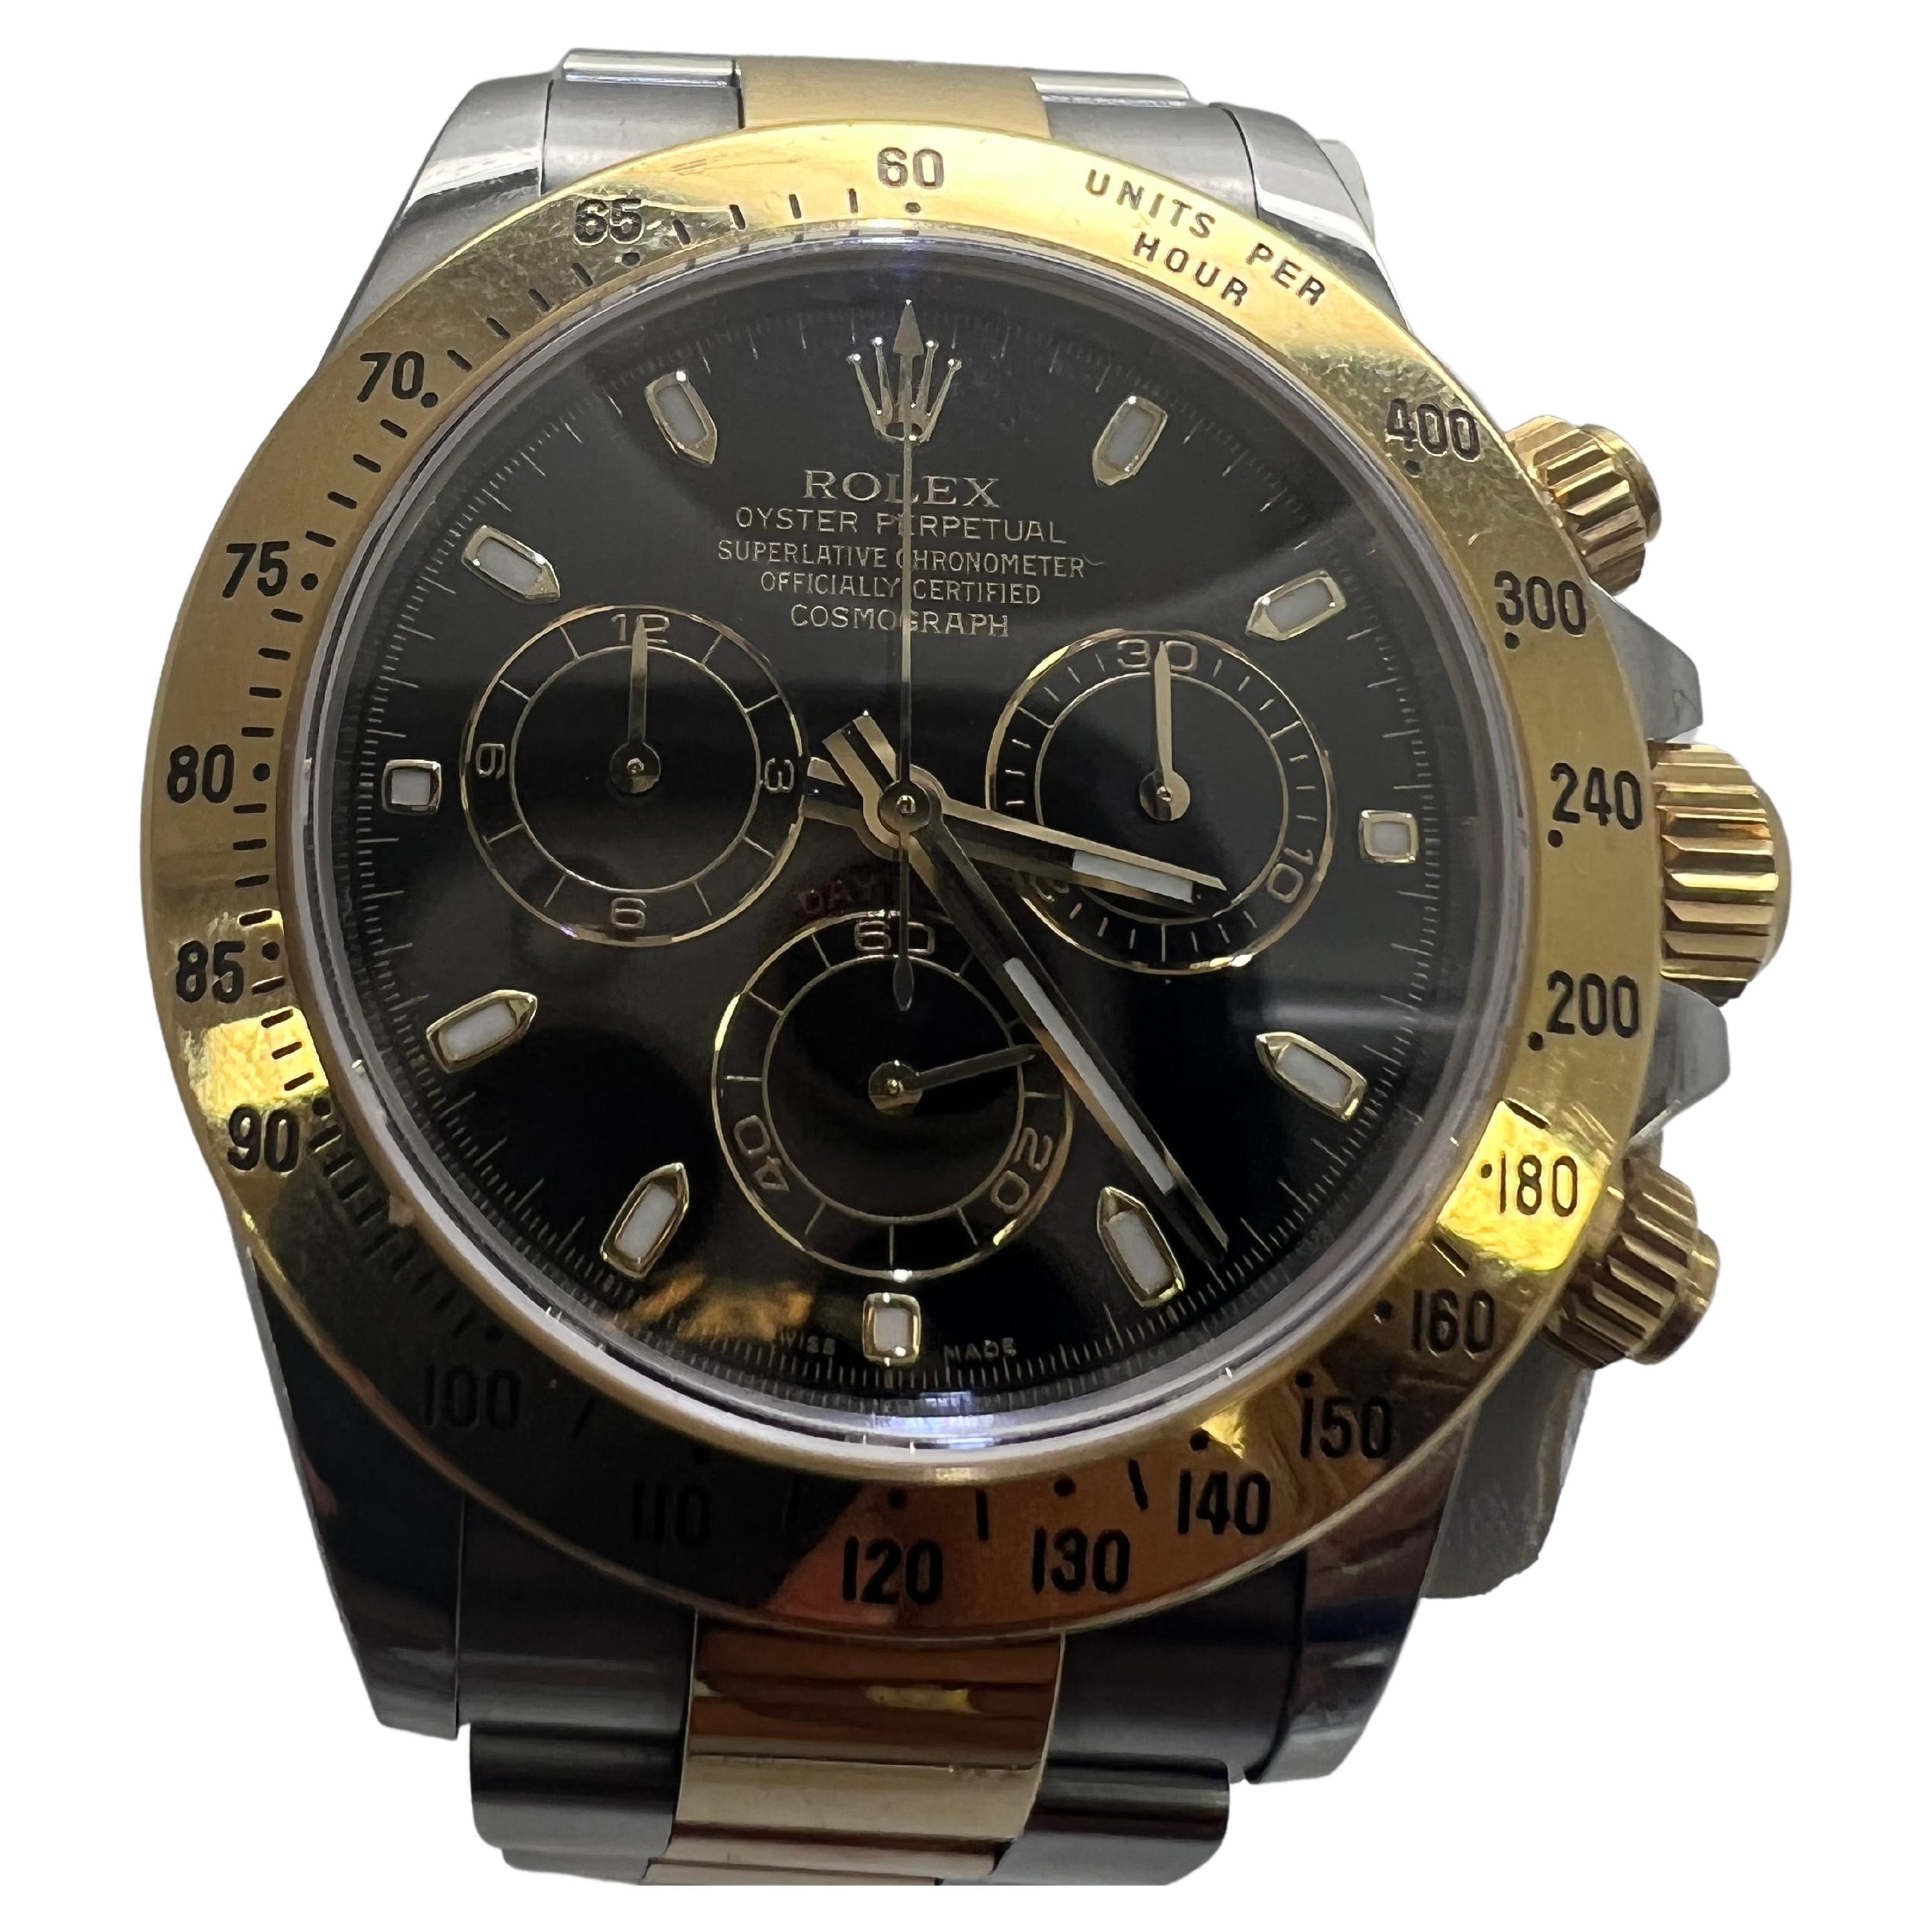 Rolex Daytona Two Tone Silver Diamond Dial Men's Watch For Sale at 